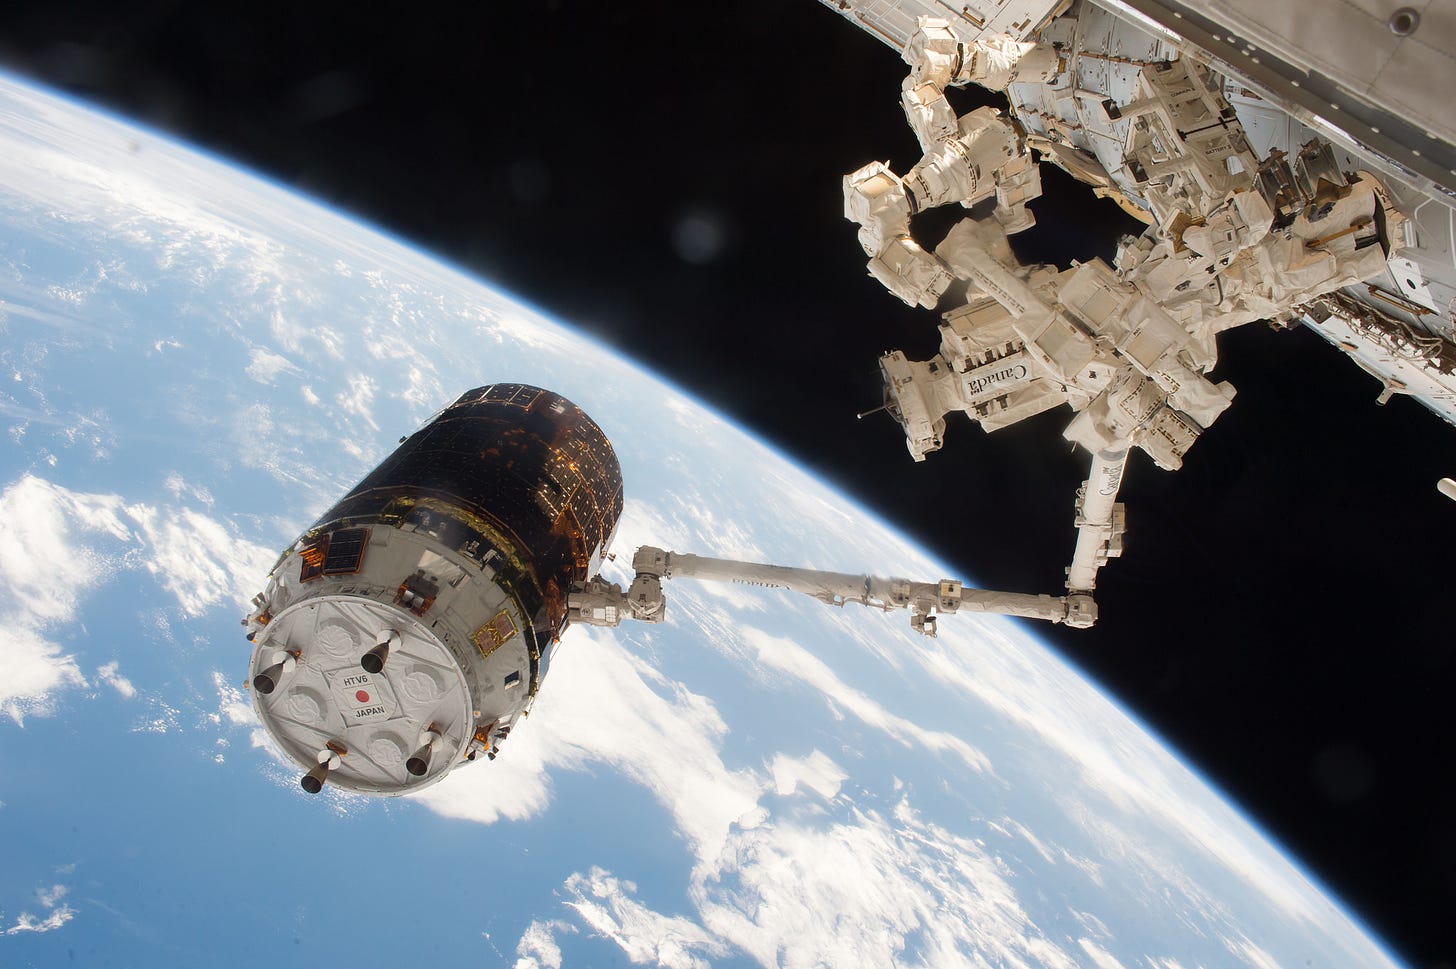 Japanese H-II Transport Vehicle-6 (HTV-6) cargo vehicle is seen grappled by the International Space Station robotic arm